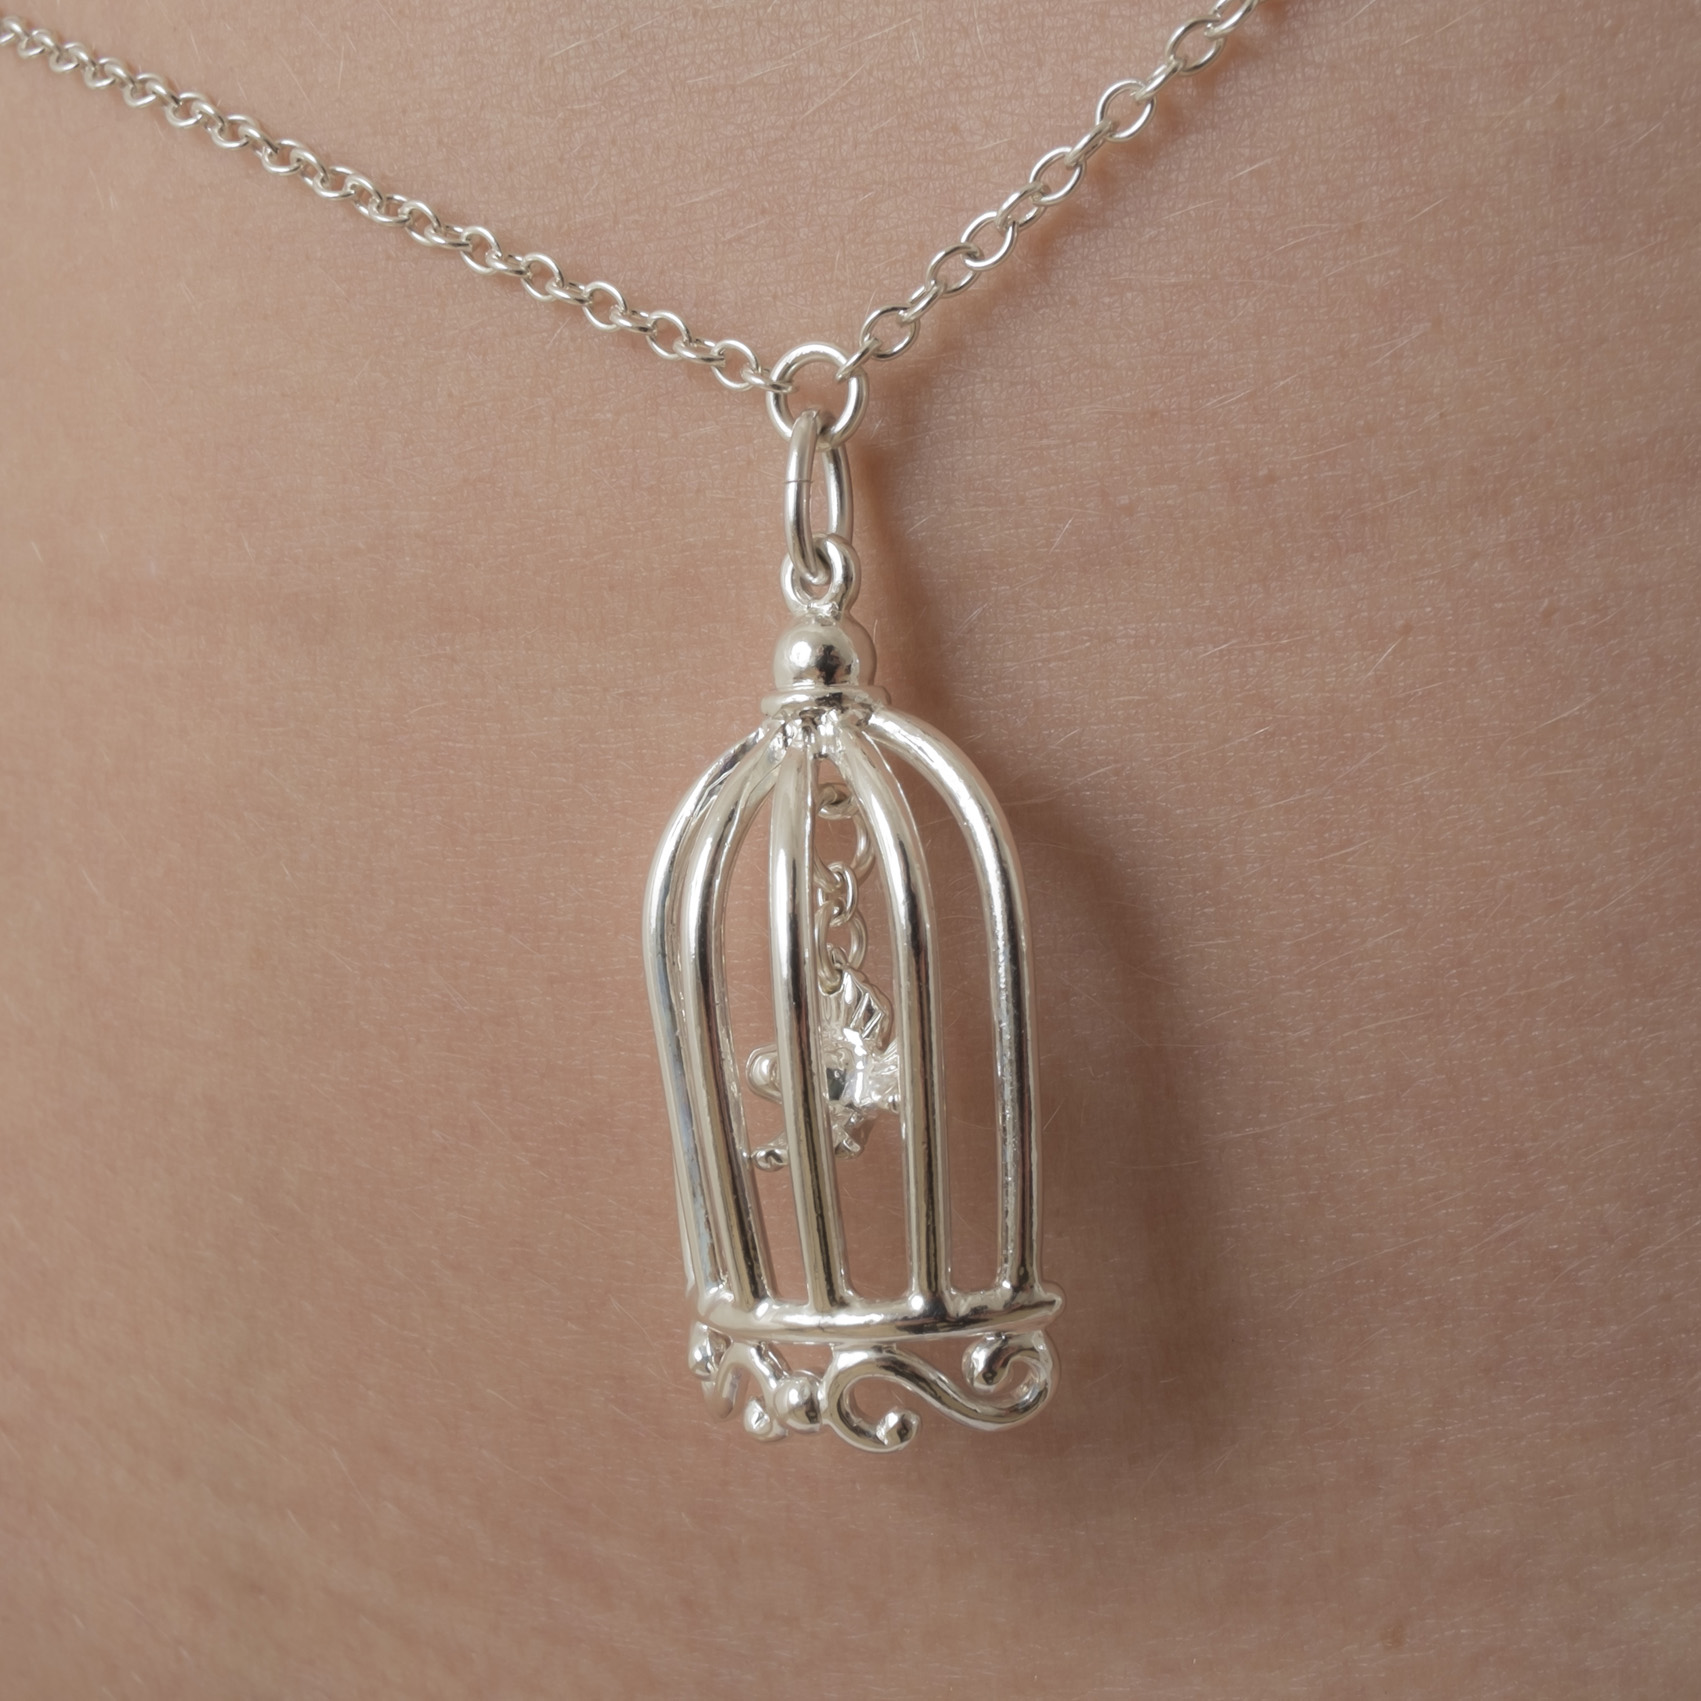 CHT125 Silver Waist Chain with Bird in a Cage Pendant